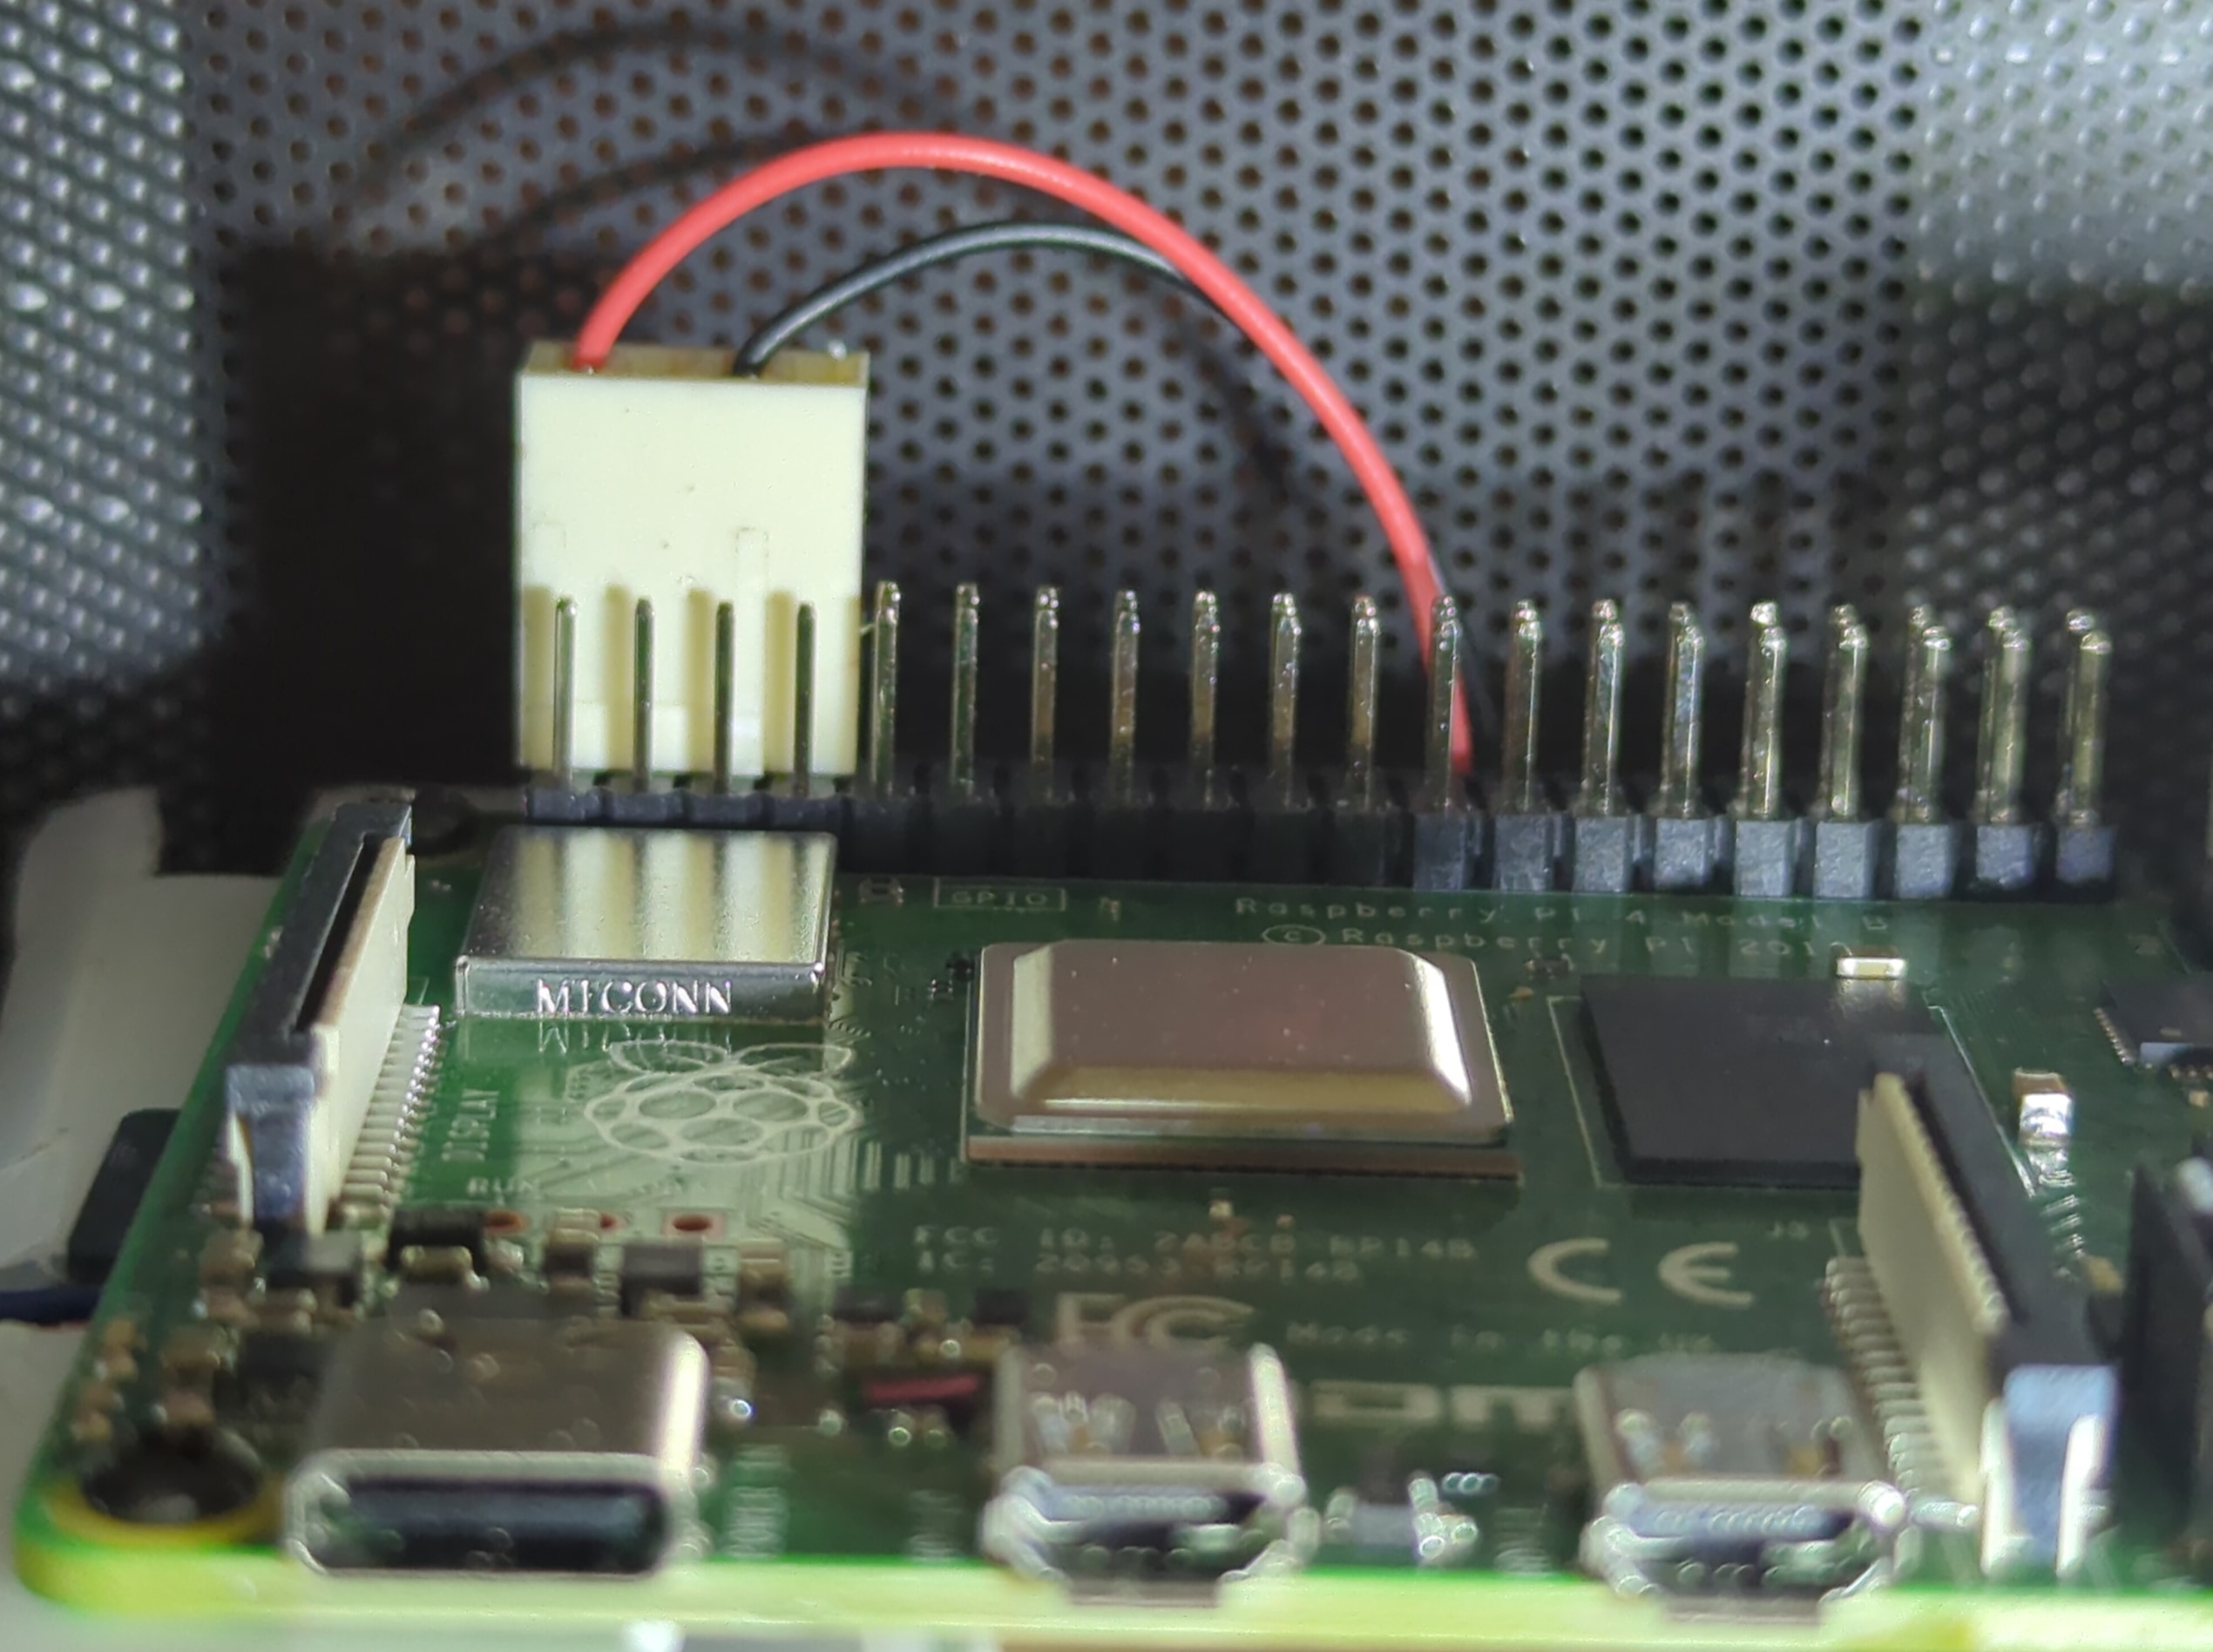 Fan connected to the Raspberry Pi GPIO interface.